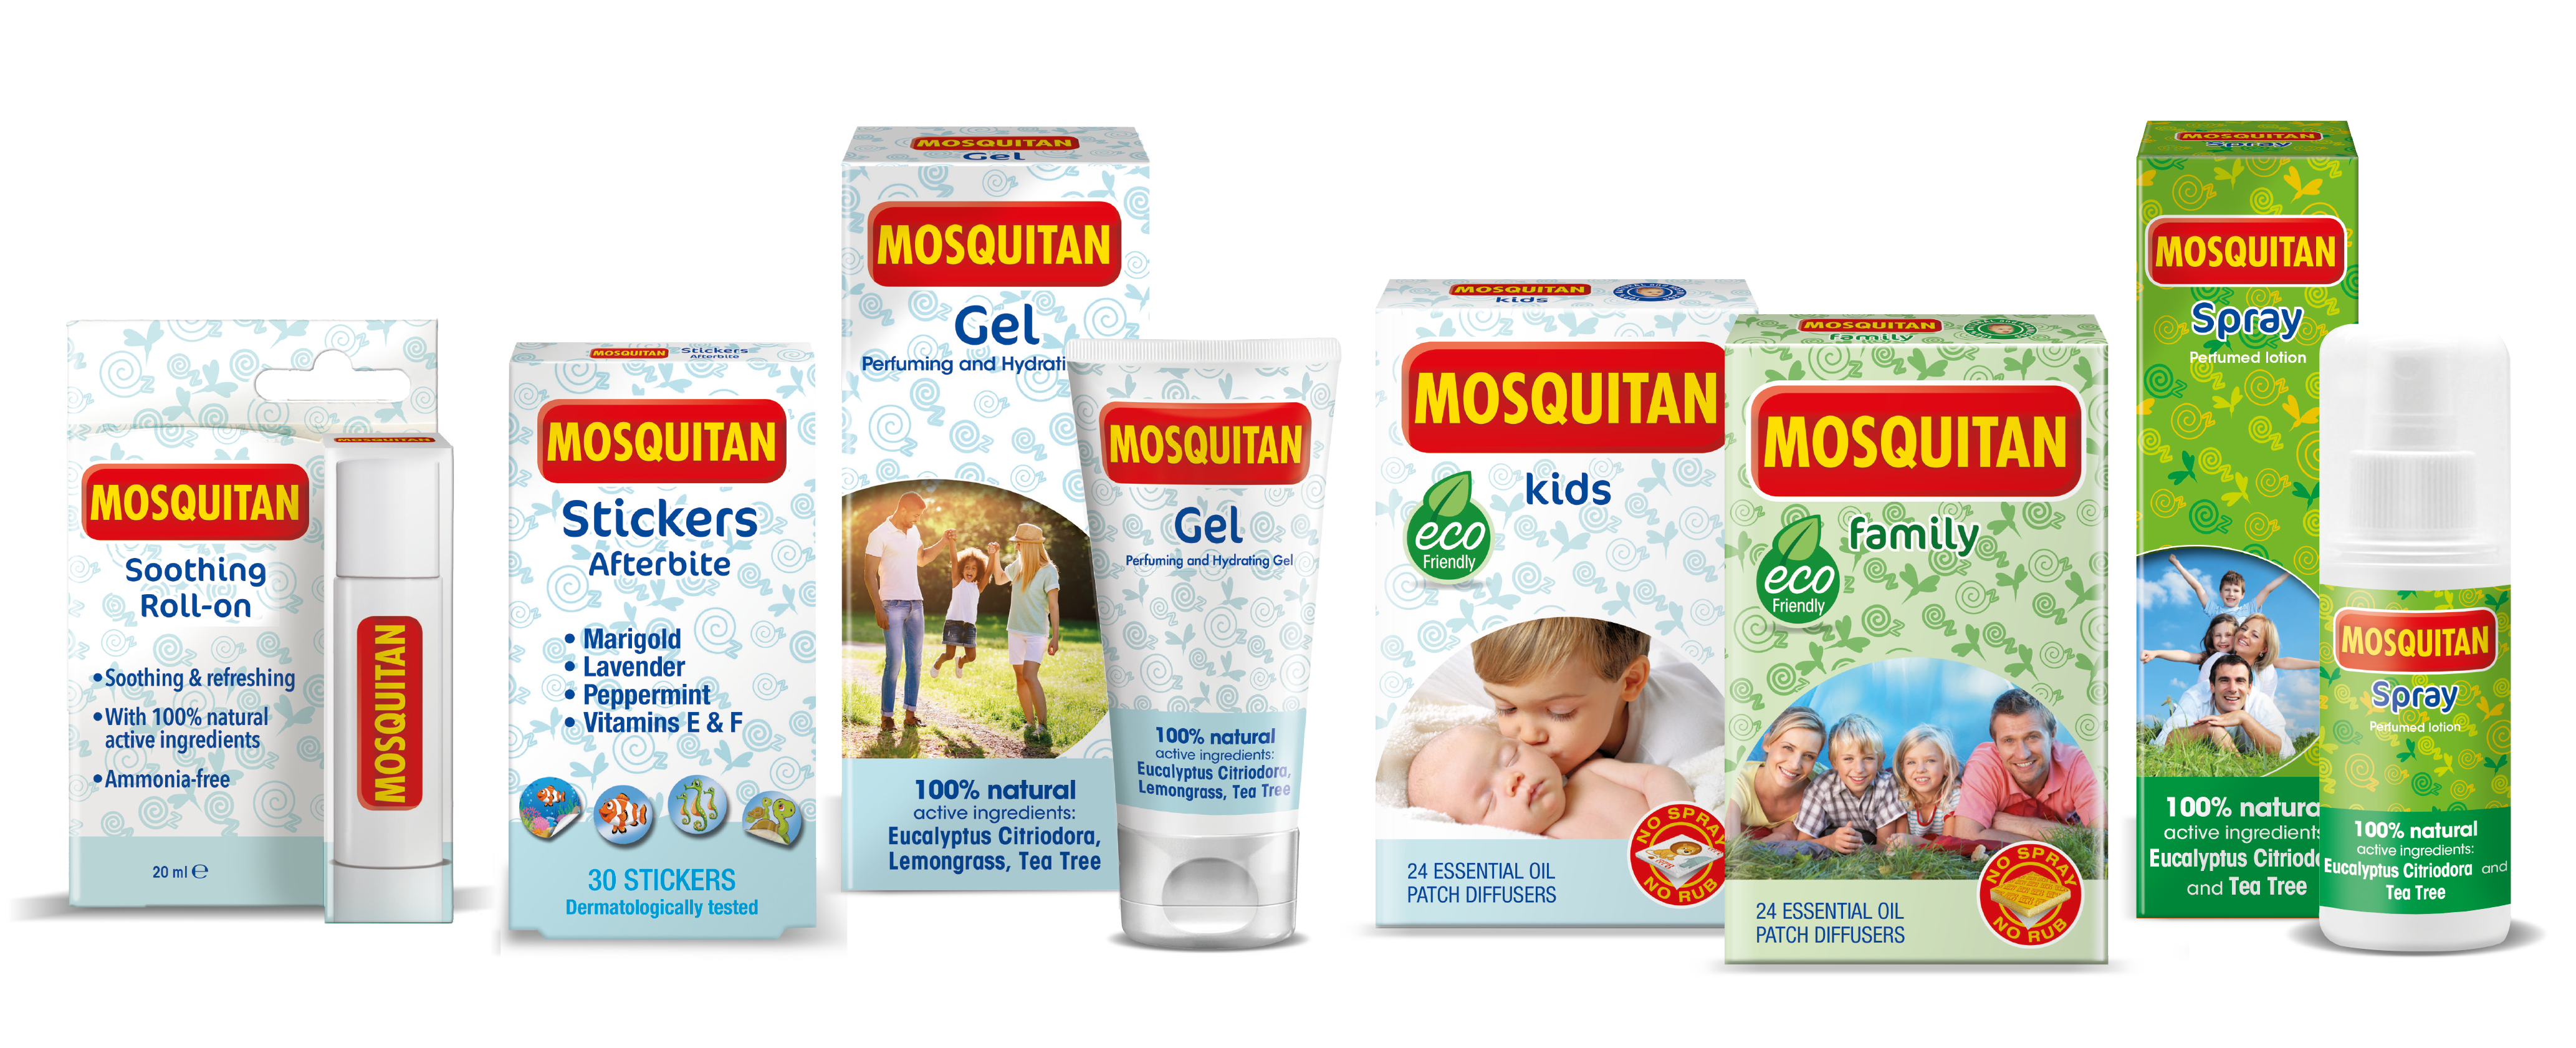 Cer'8/Mosquitan Line_MOSQUITO PROTECTION BASED ON ESSENTIAL OILS